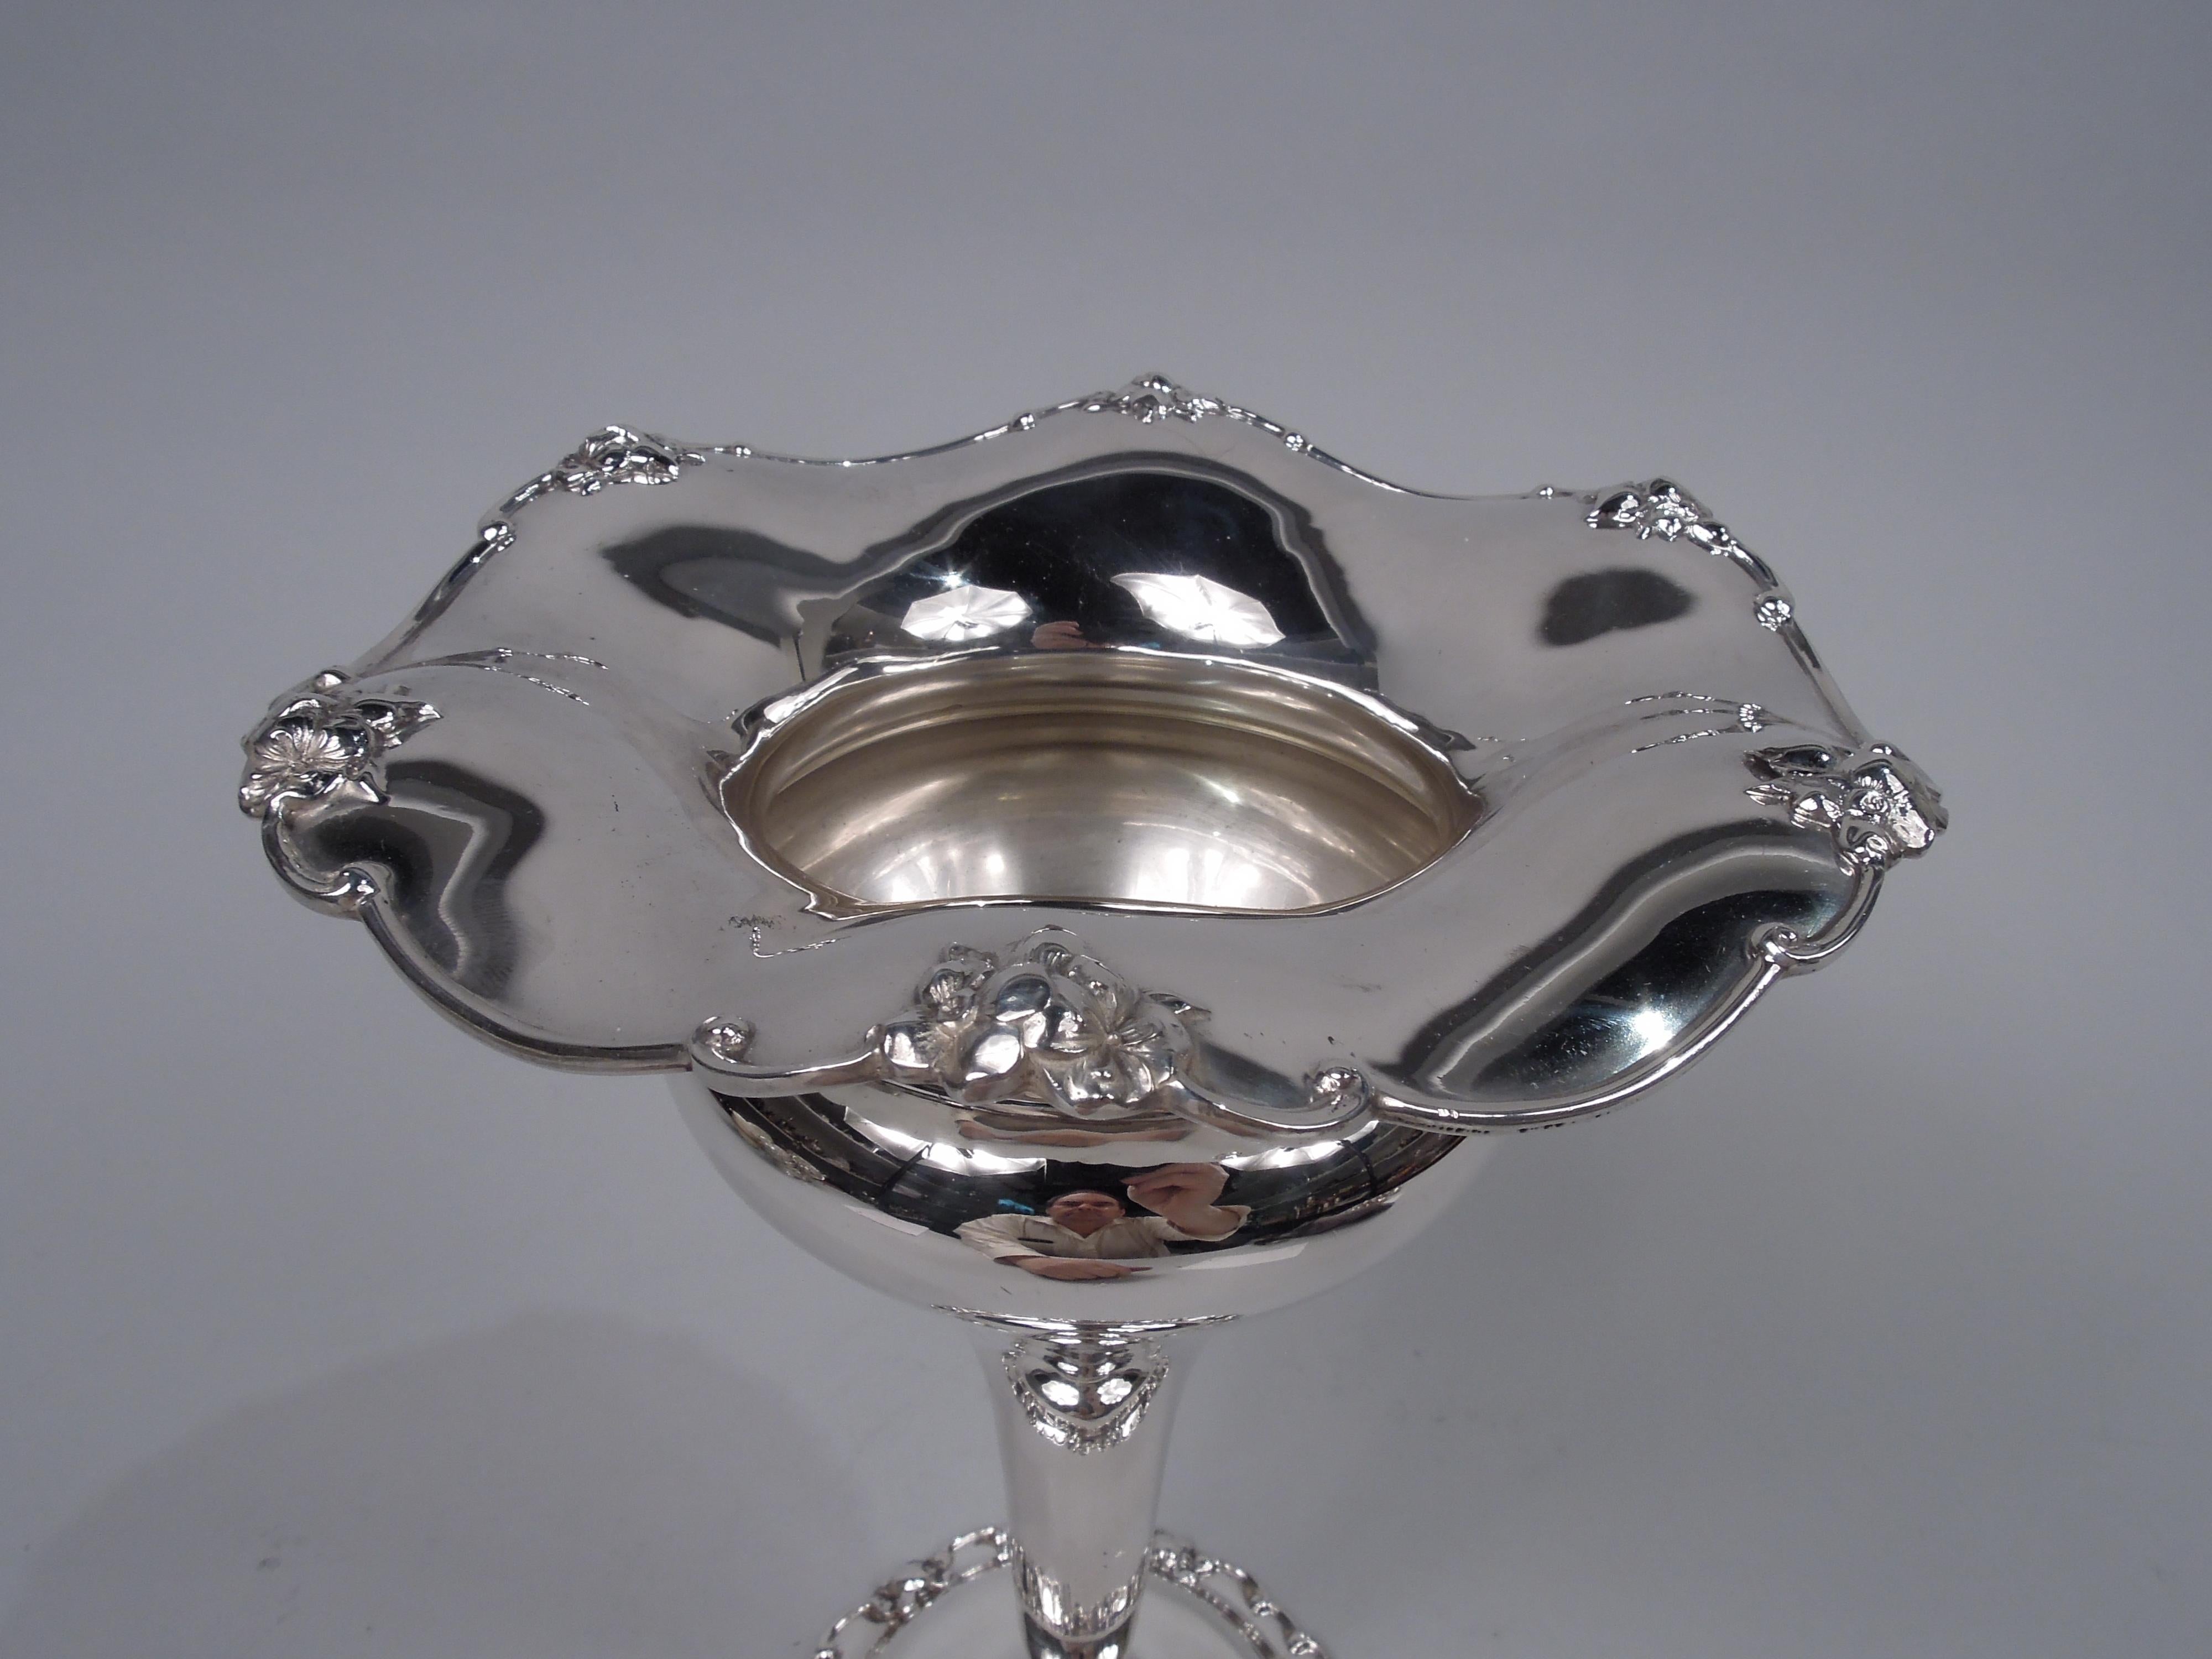 Edwardian sterling silver vase. Made by Gorham in Providence in 1904. Steeply tapering ovoid body; domed foot. Rims scrolled with applied flowers; mouth rim wavy. Fully marked including maker’s stamp, no. 4678A, and date symbol. Weight: 14 troy